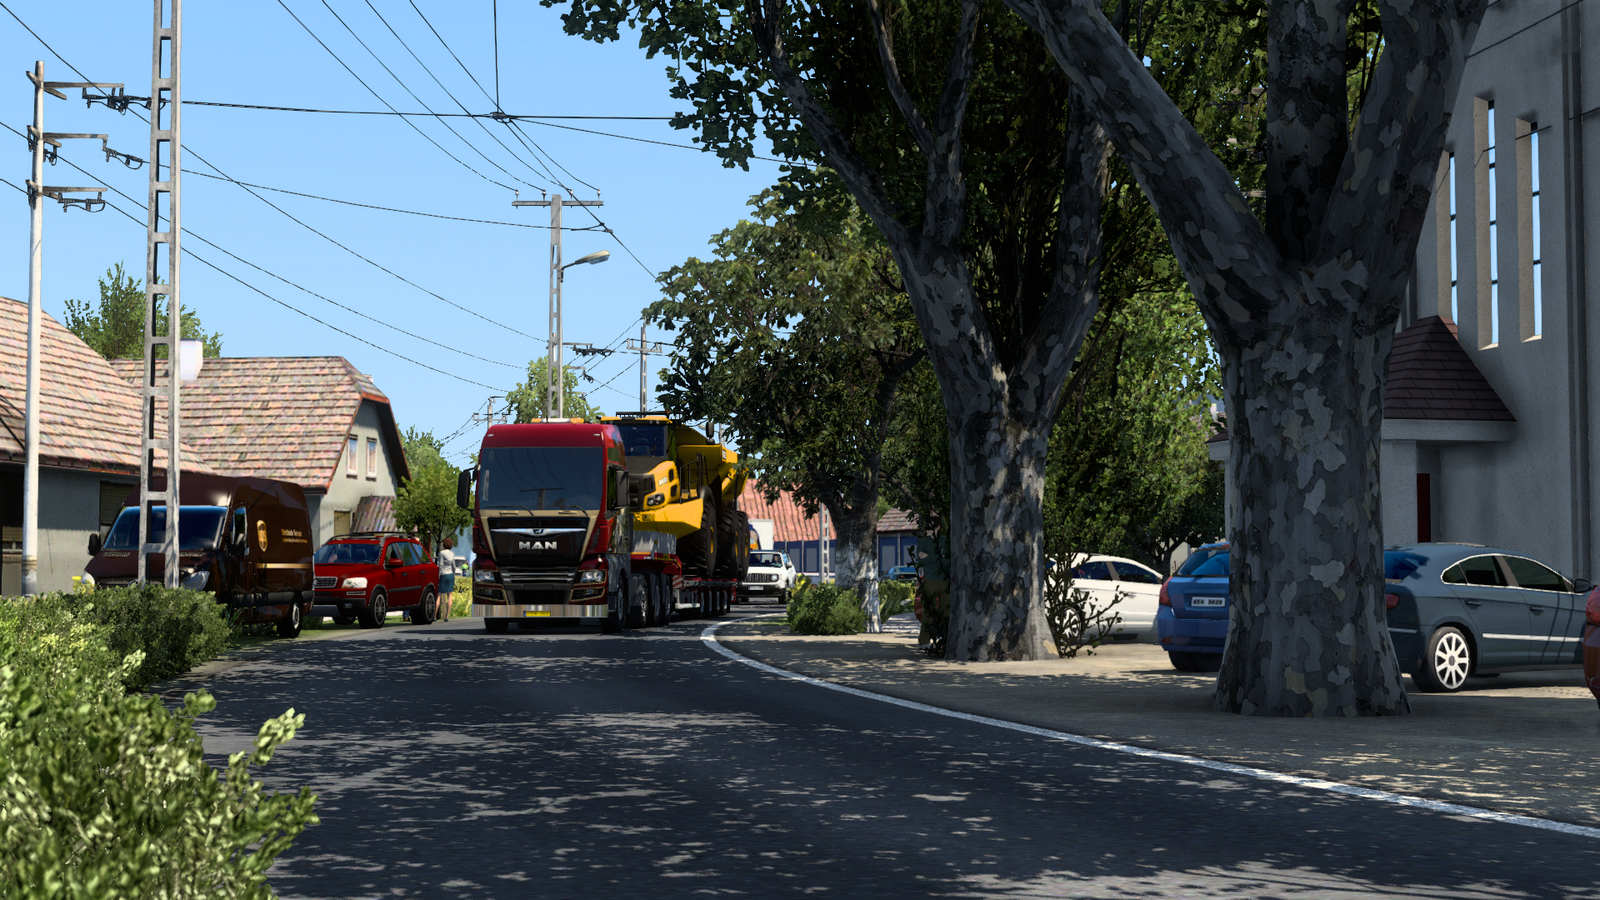 ets2_20221017_130318_00.png